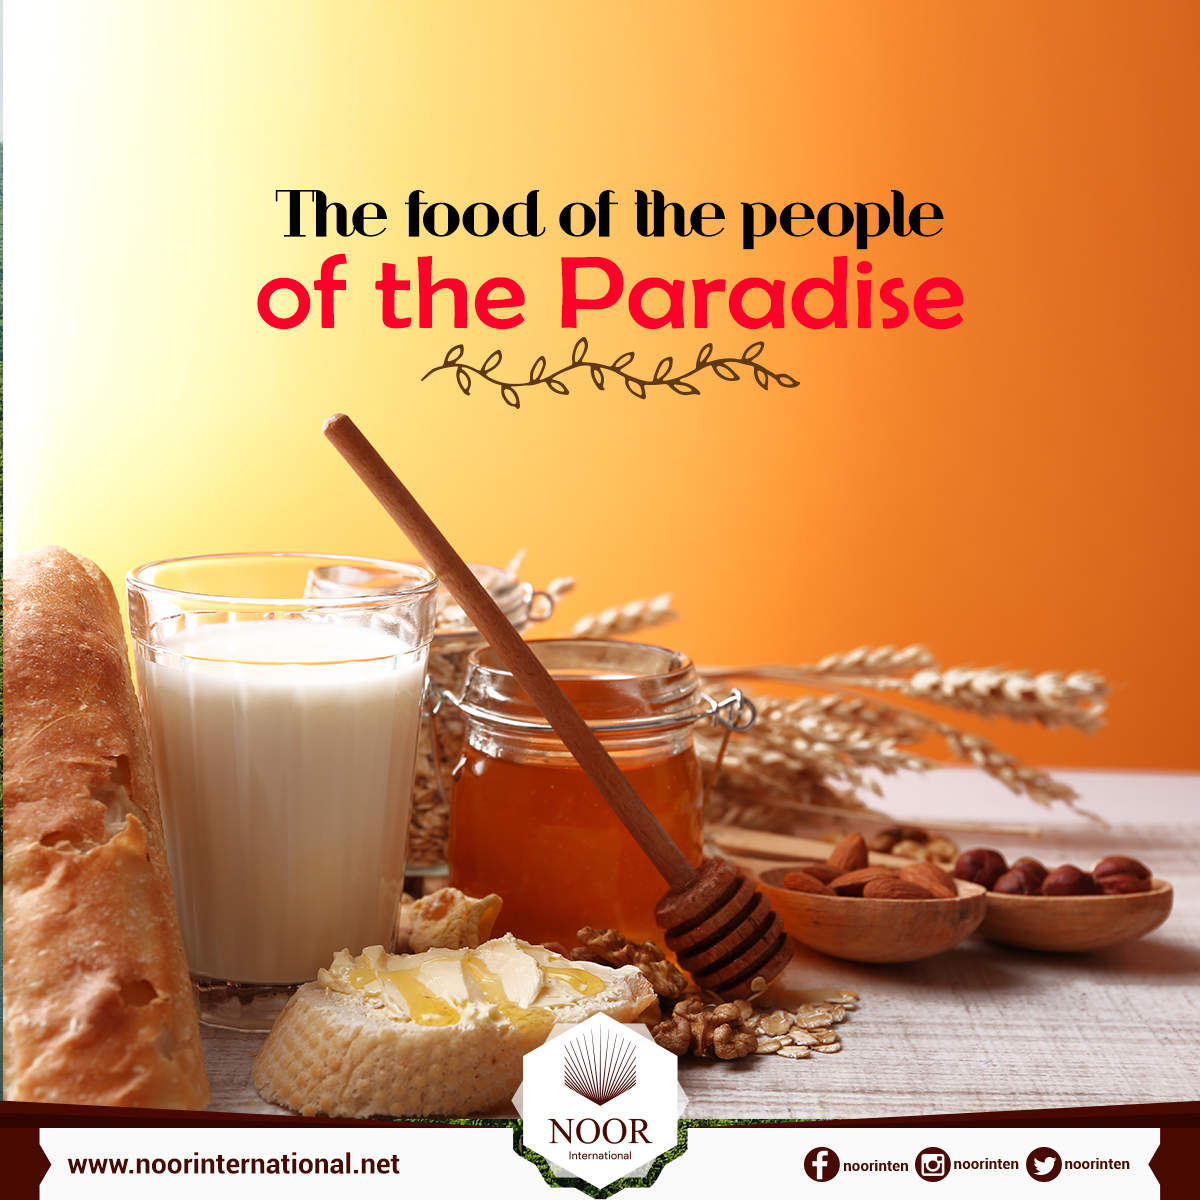 The food of the people of the Paradise